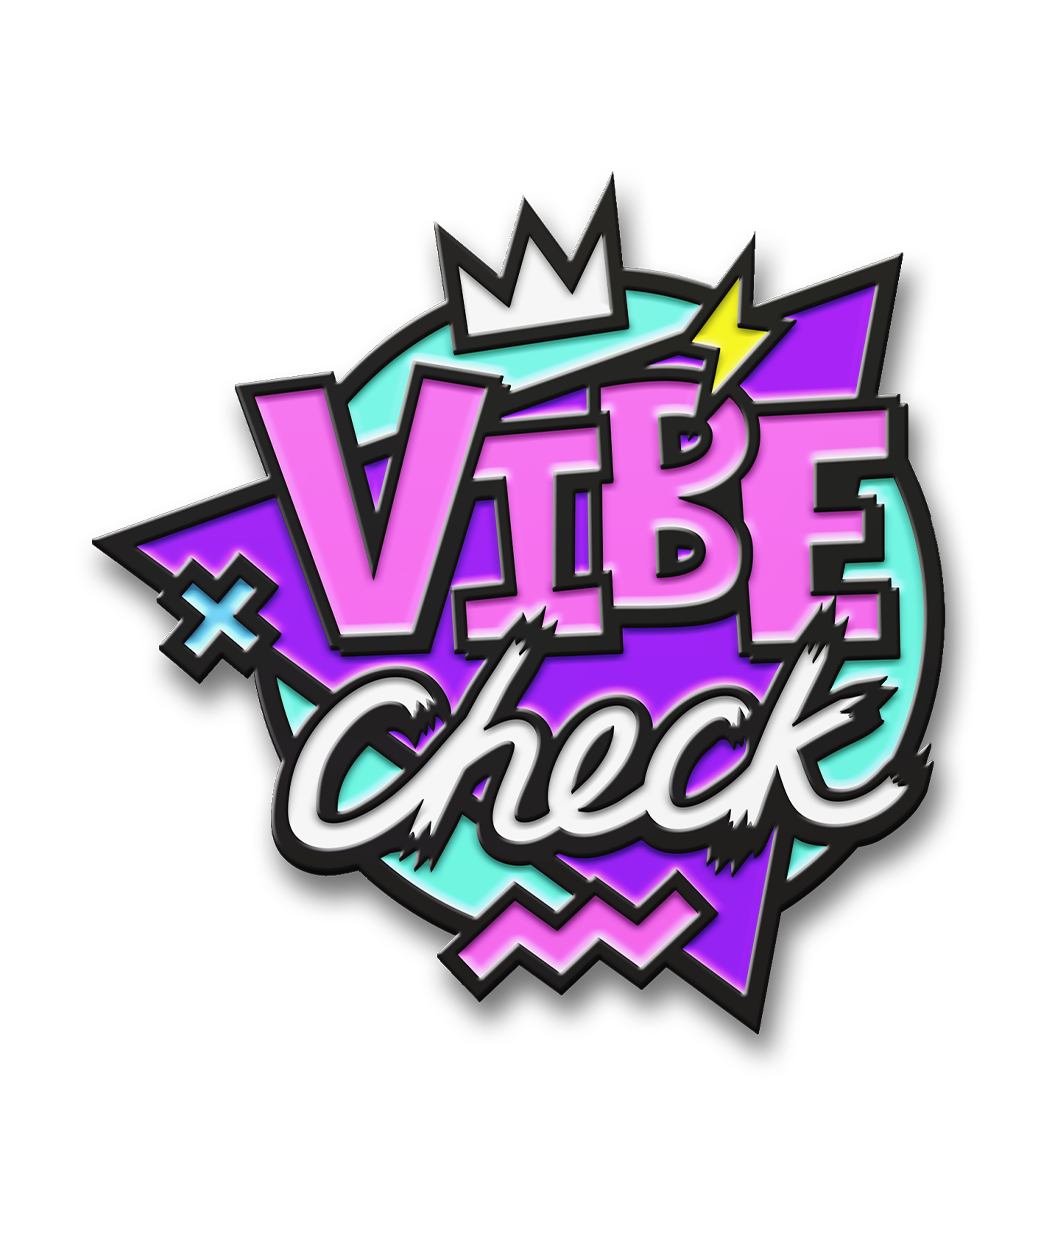 Black plated enamel pin with the words Vibe Check illustrated in bright purple and white. There is a purple triangle and light blue circle in the background and a white doodled crown on top with a small yellow lightning bolt on the B in vibe.